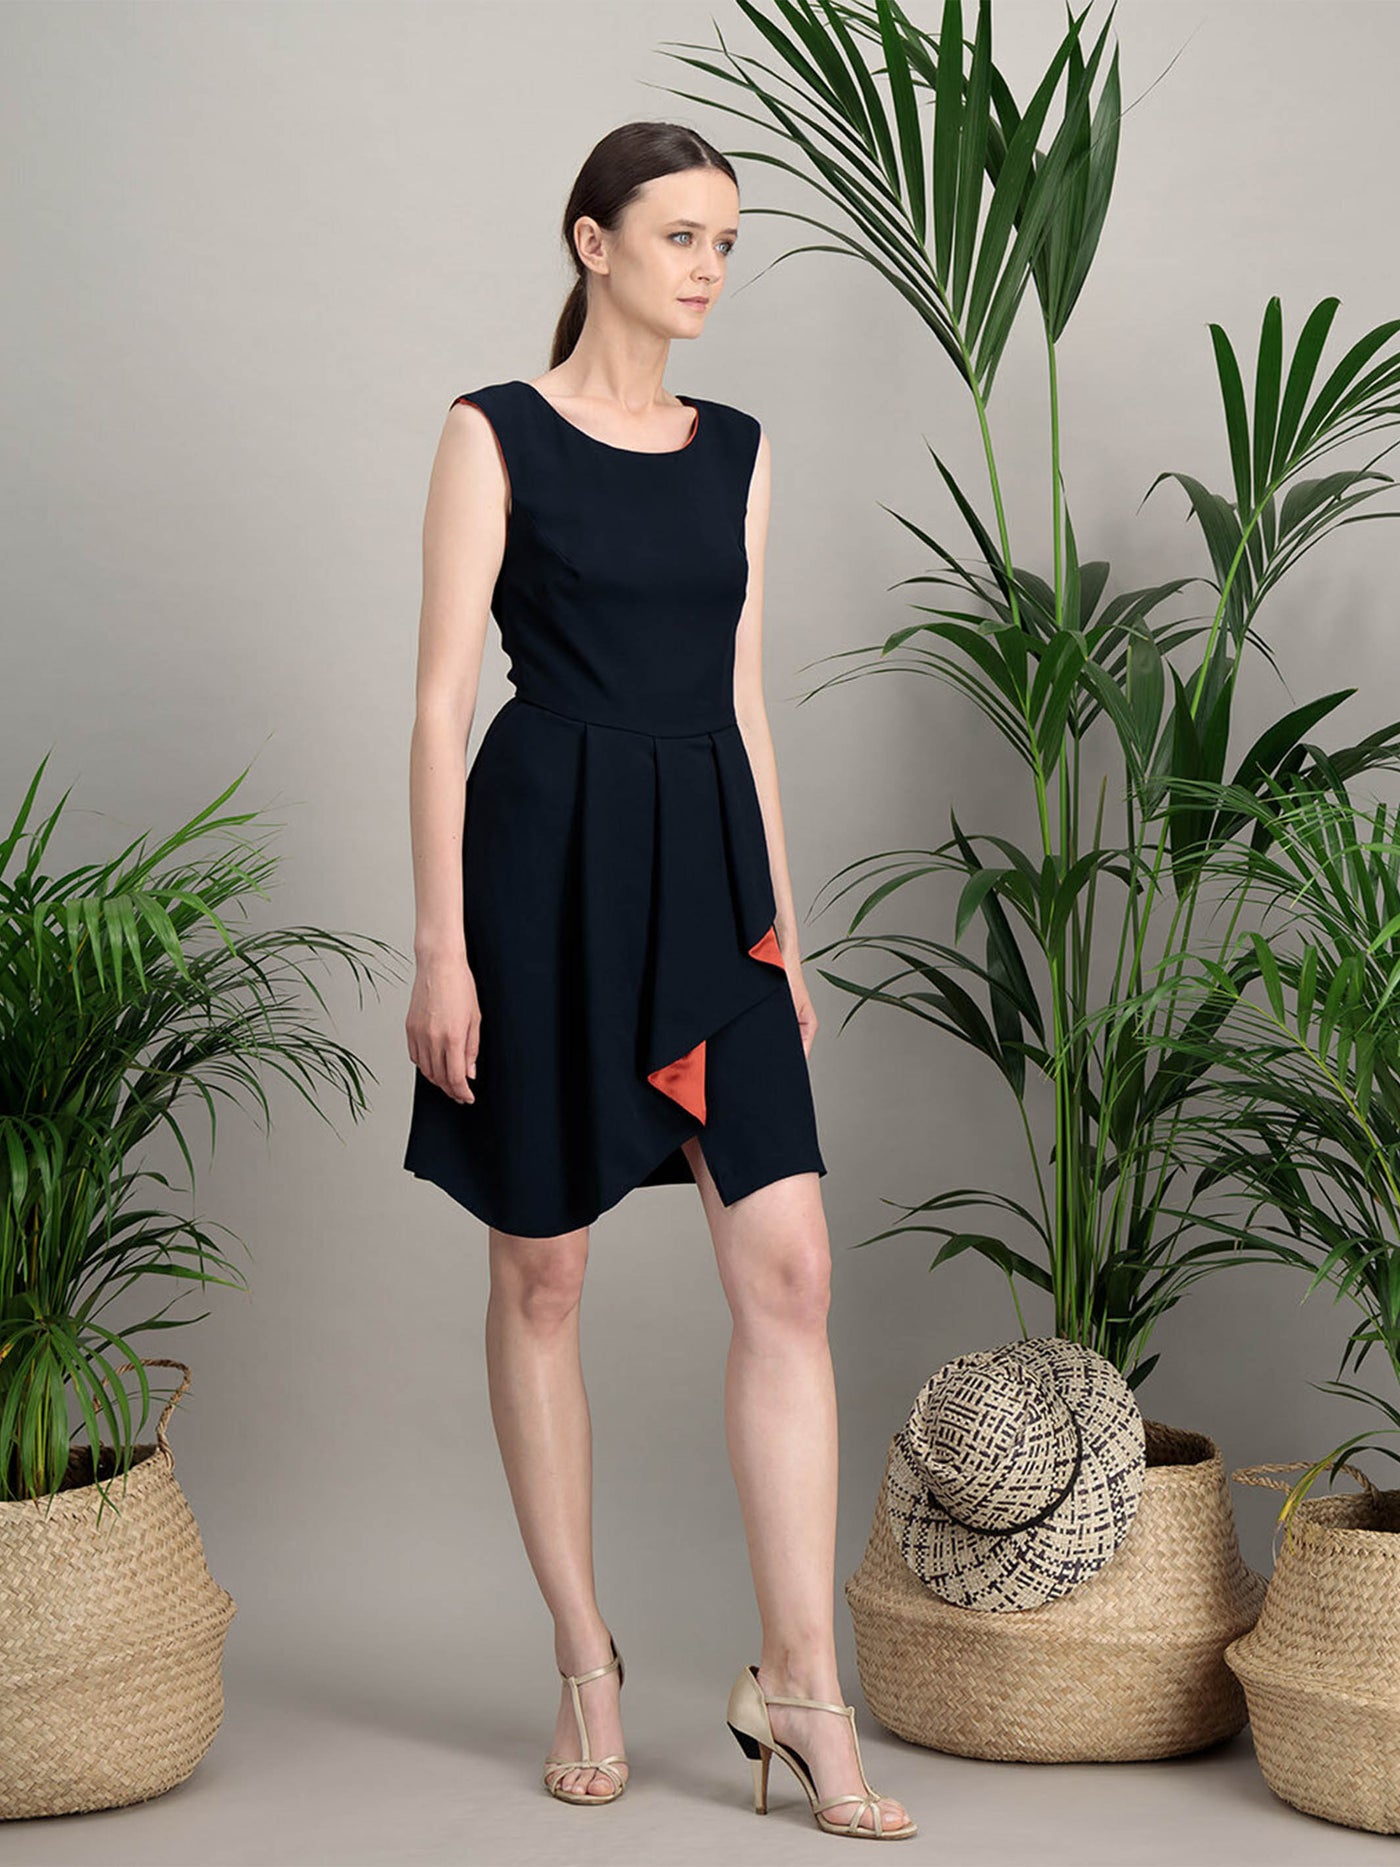 “CHAOS” DRESS in navy crepe and coral silk